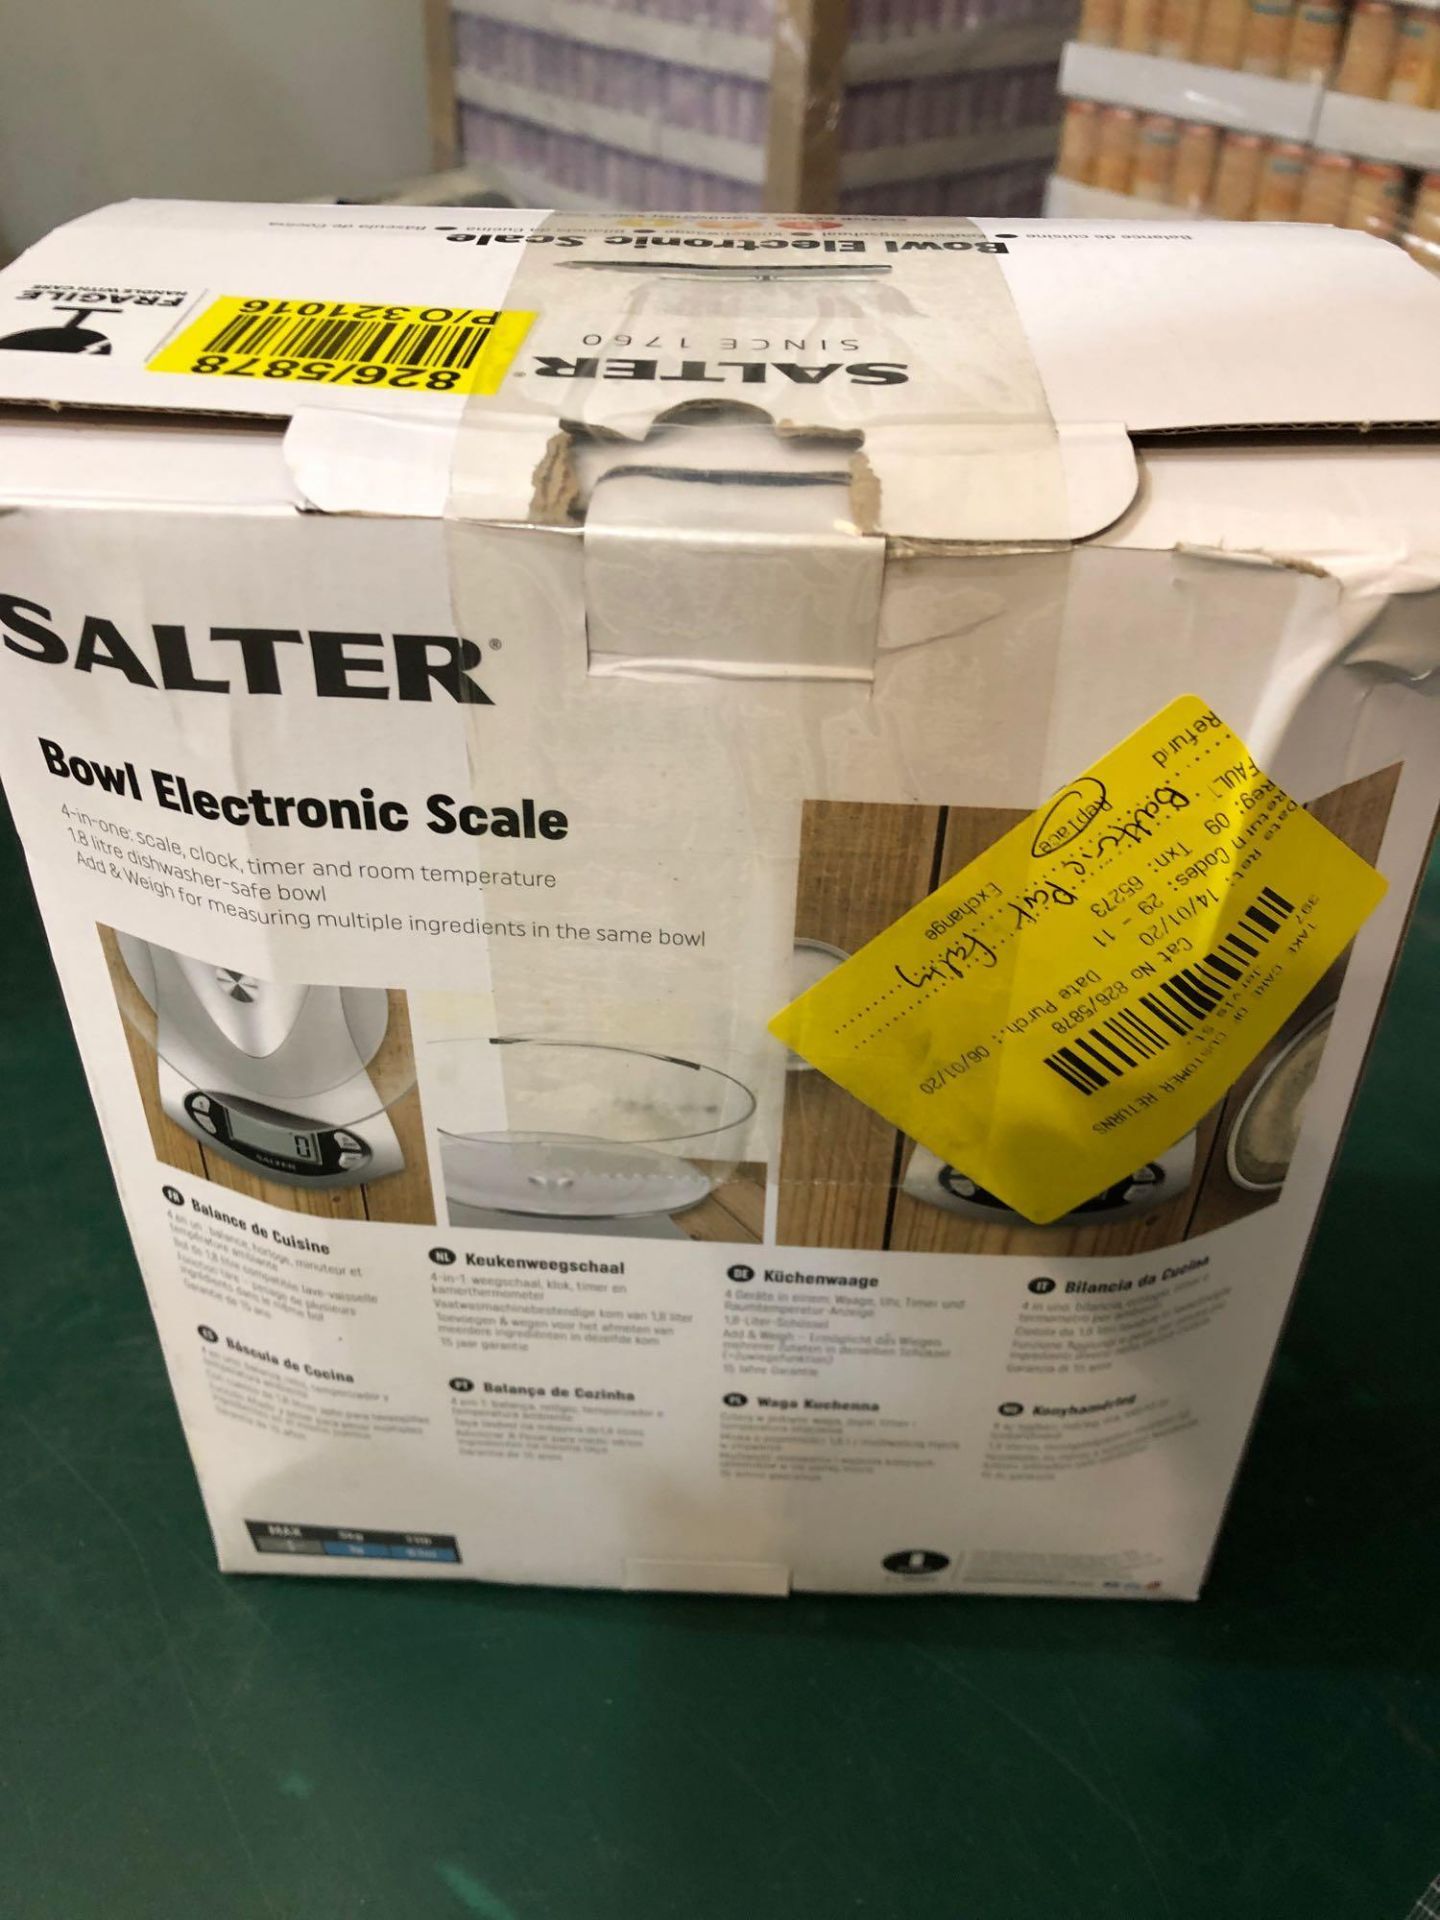 Salter Electronic Bowl Scale 826/5878 £13.00 RRP - Image 4 of 5